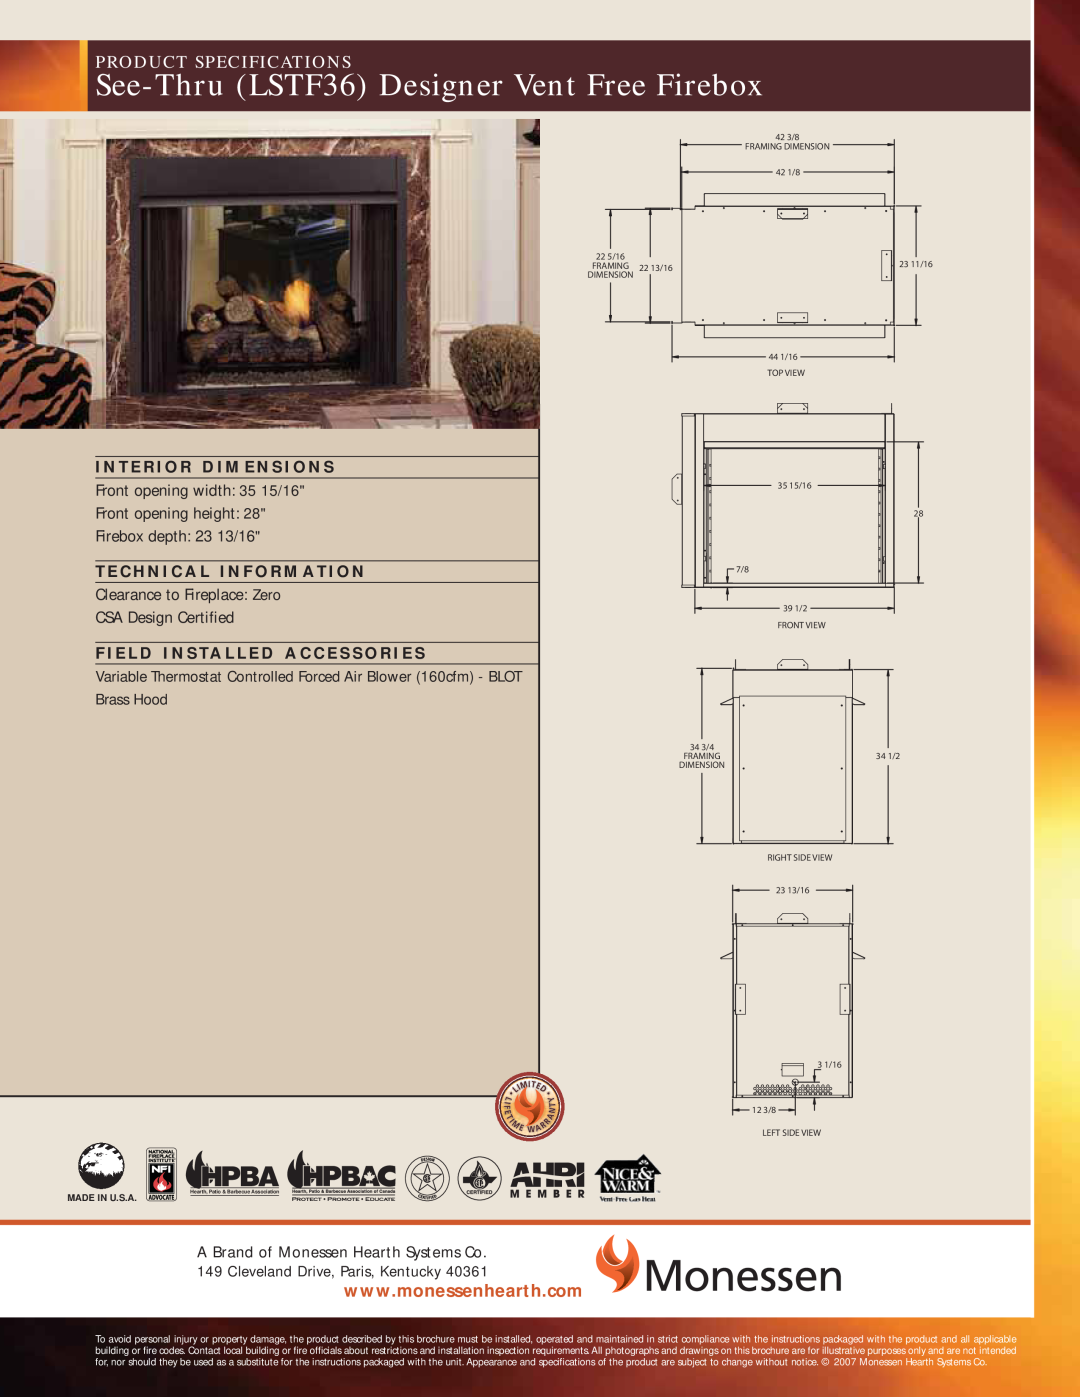 Monessen Hearth specifications See-ThruLSTF36 Designer Vent Free Firebox, Product Specifications, Made In U.S.A 